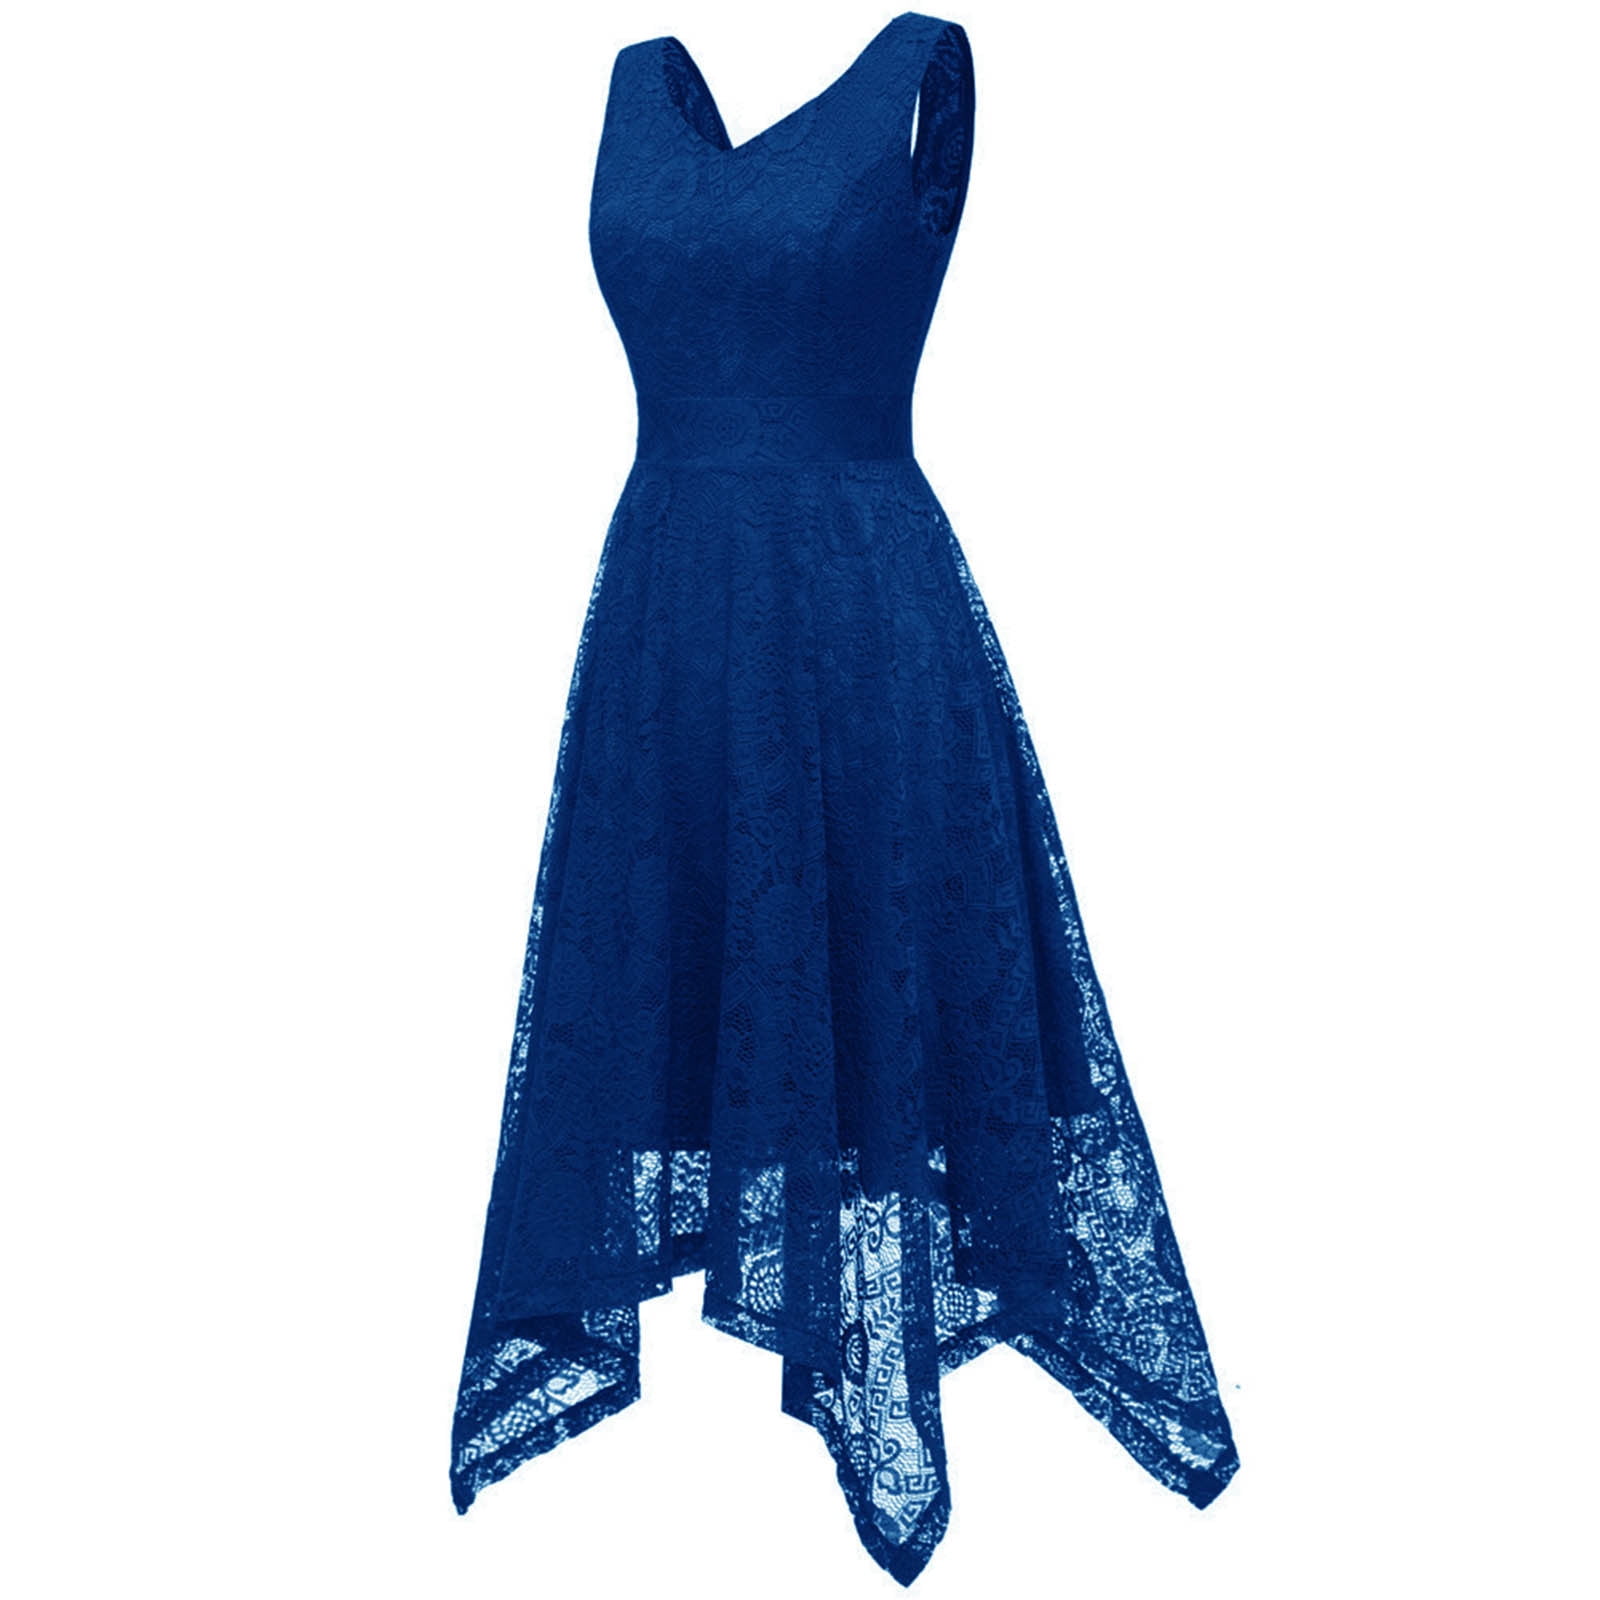 Royal blue 12 panels ball gown for... - Amarah's Rental Gown | Facebook